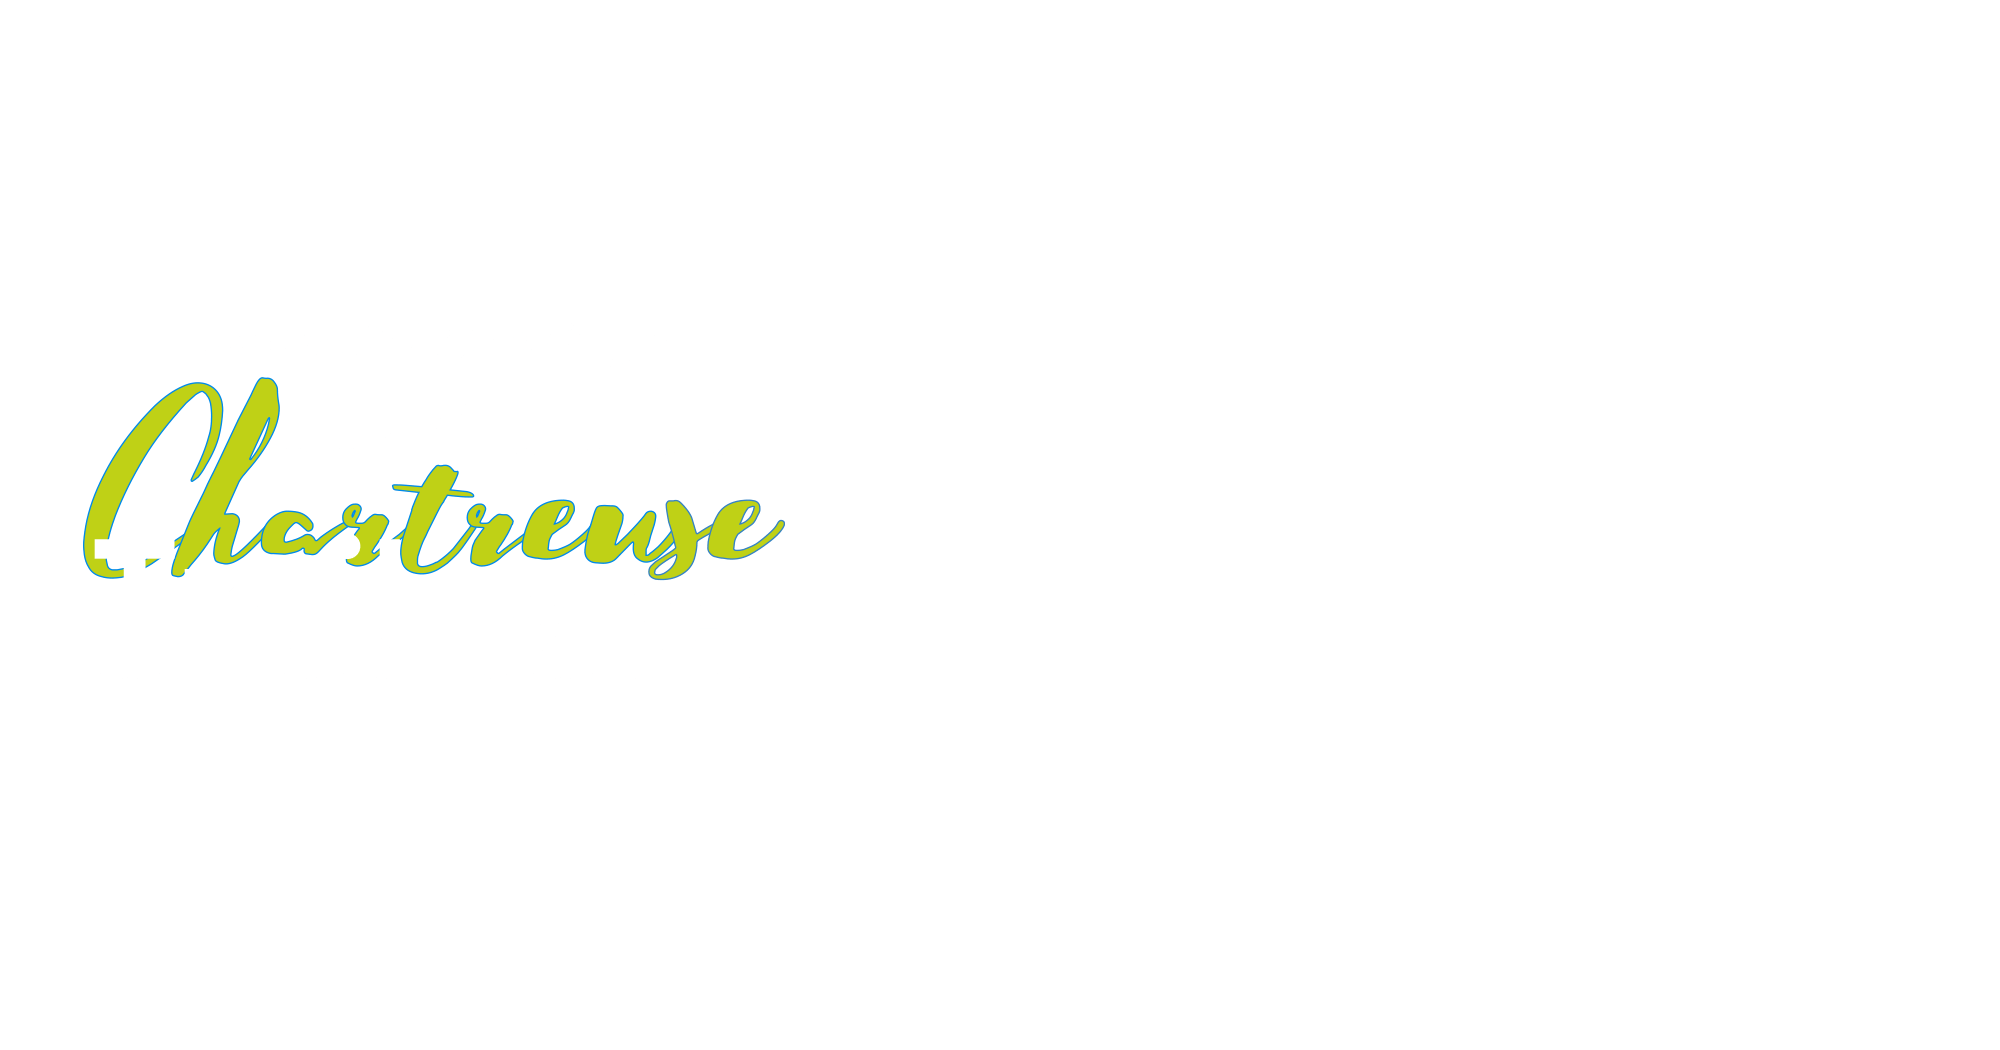 Chartreuse Logo - Chartreuse Trail Festival